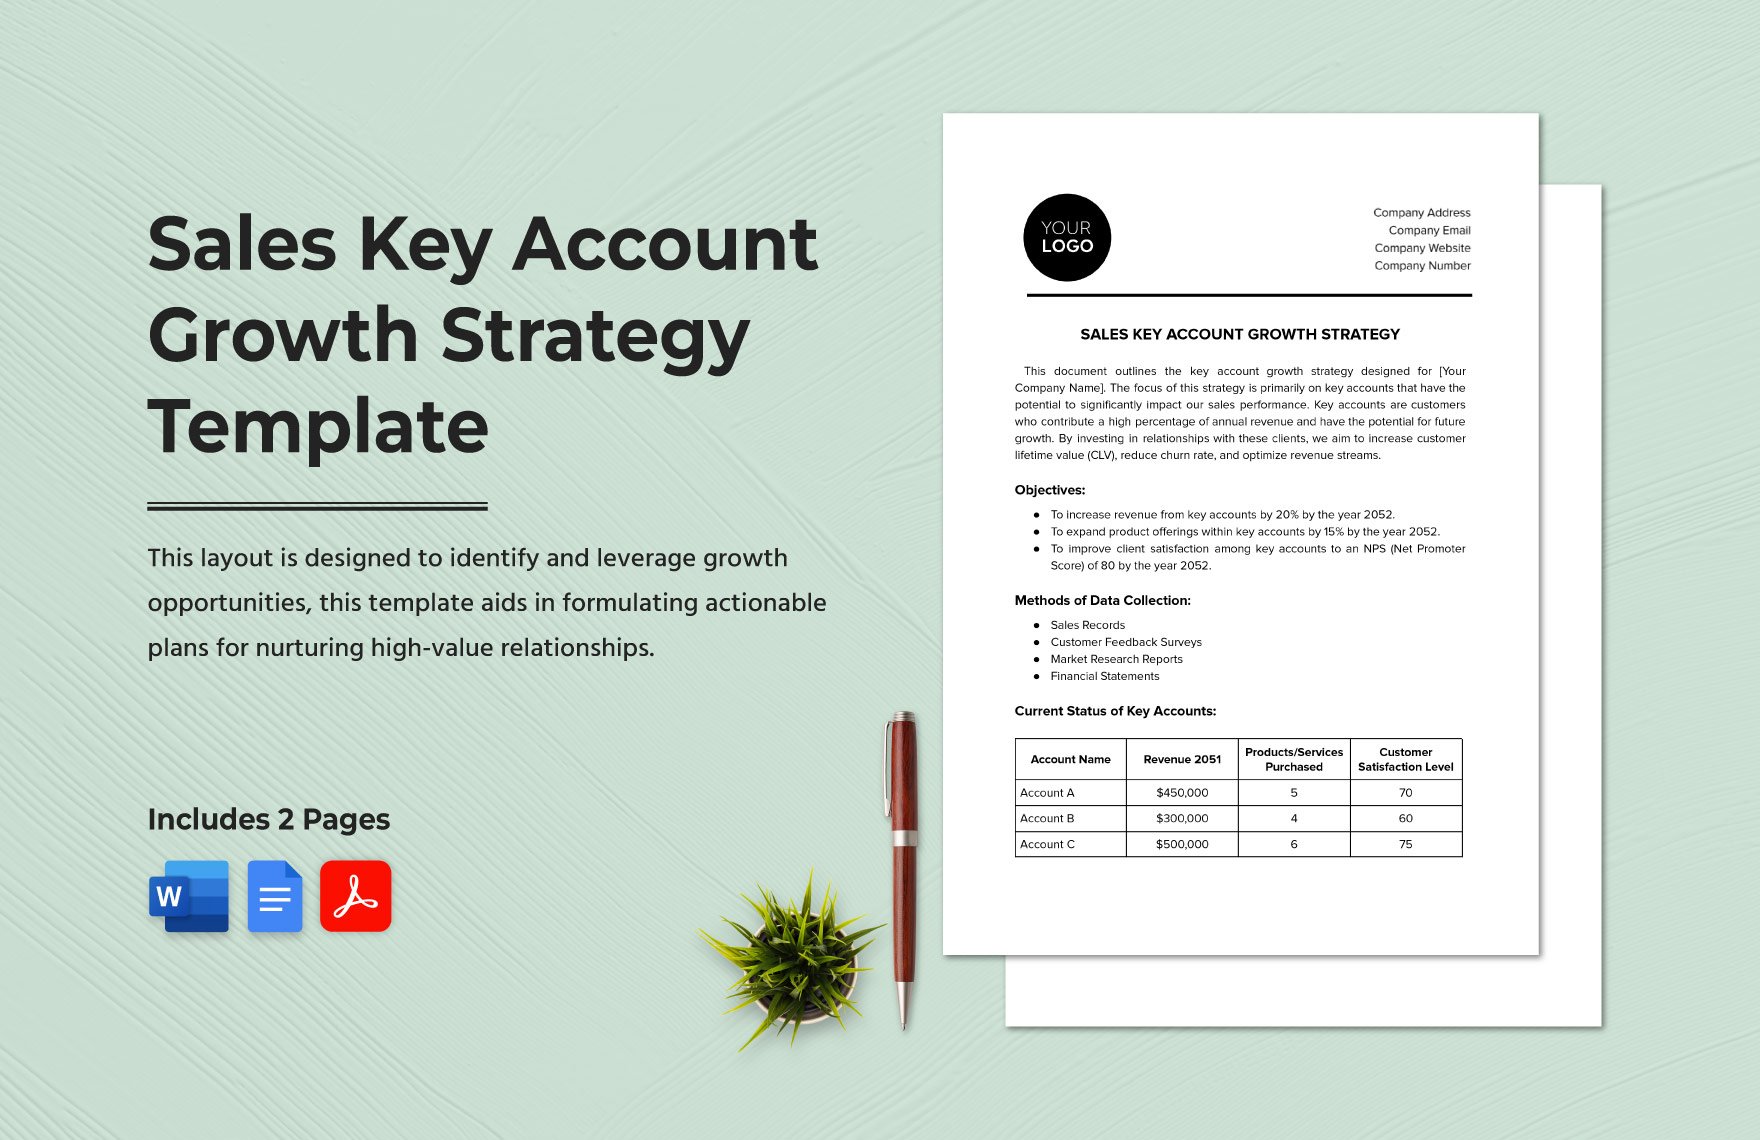 Sales Key Account Growth Strategy Template in Word, Google Docs, PDF